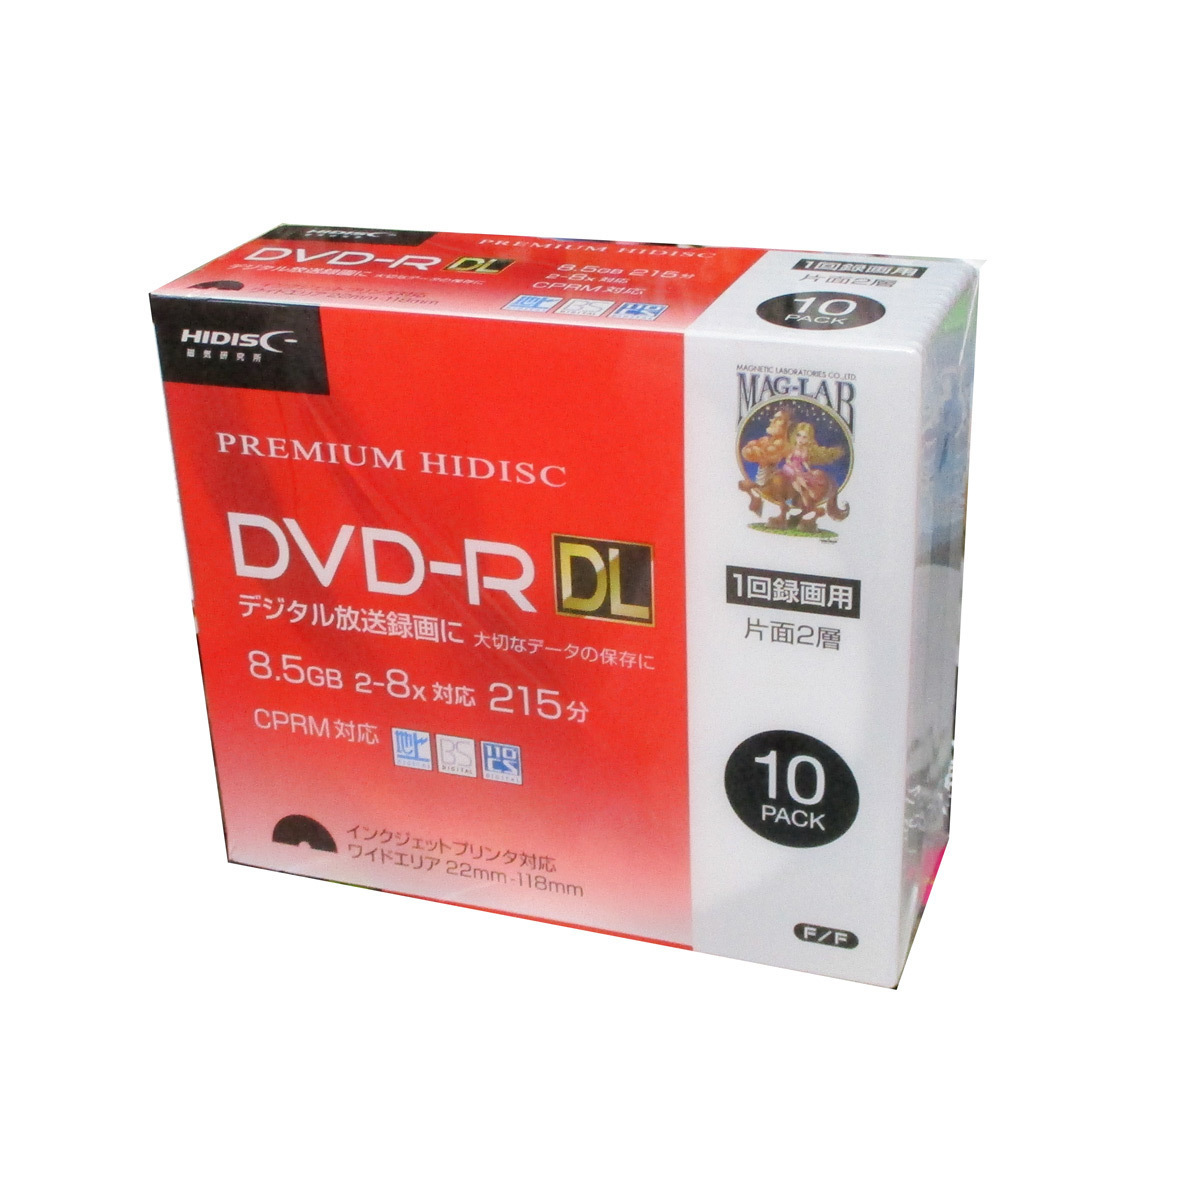  free shipping DVD-R DL video recording for one side 2 layer 8.5GB 10 sheets 8 speed CPRM correspondence 10 sheets slim in the case HIDISC HDDR21JCP10SC/0537x1 piece 